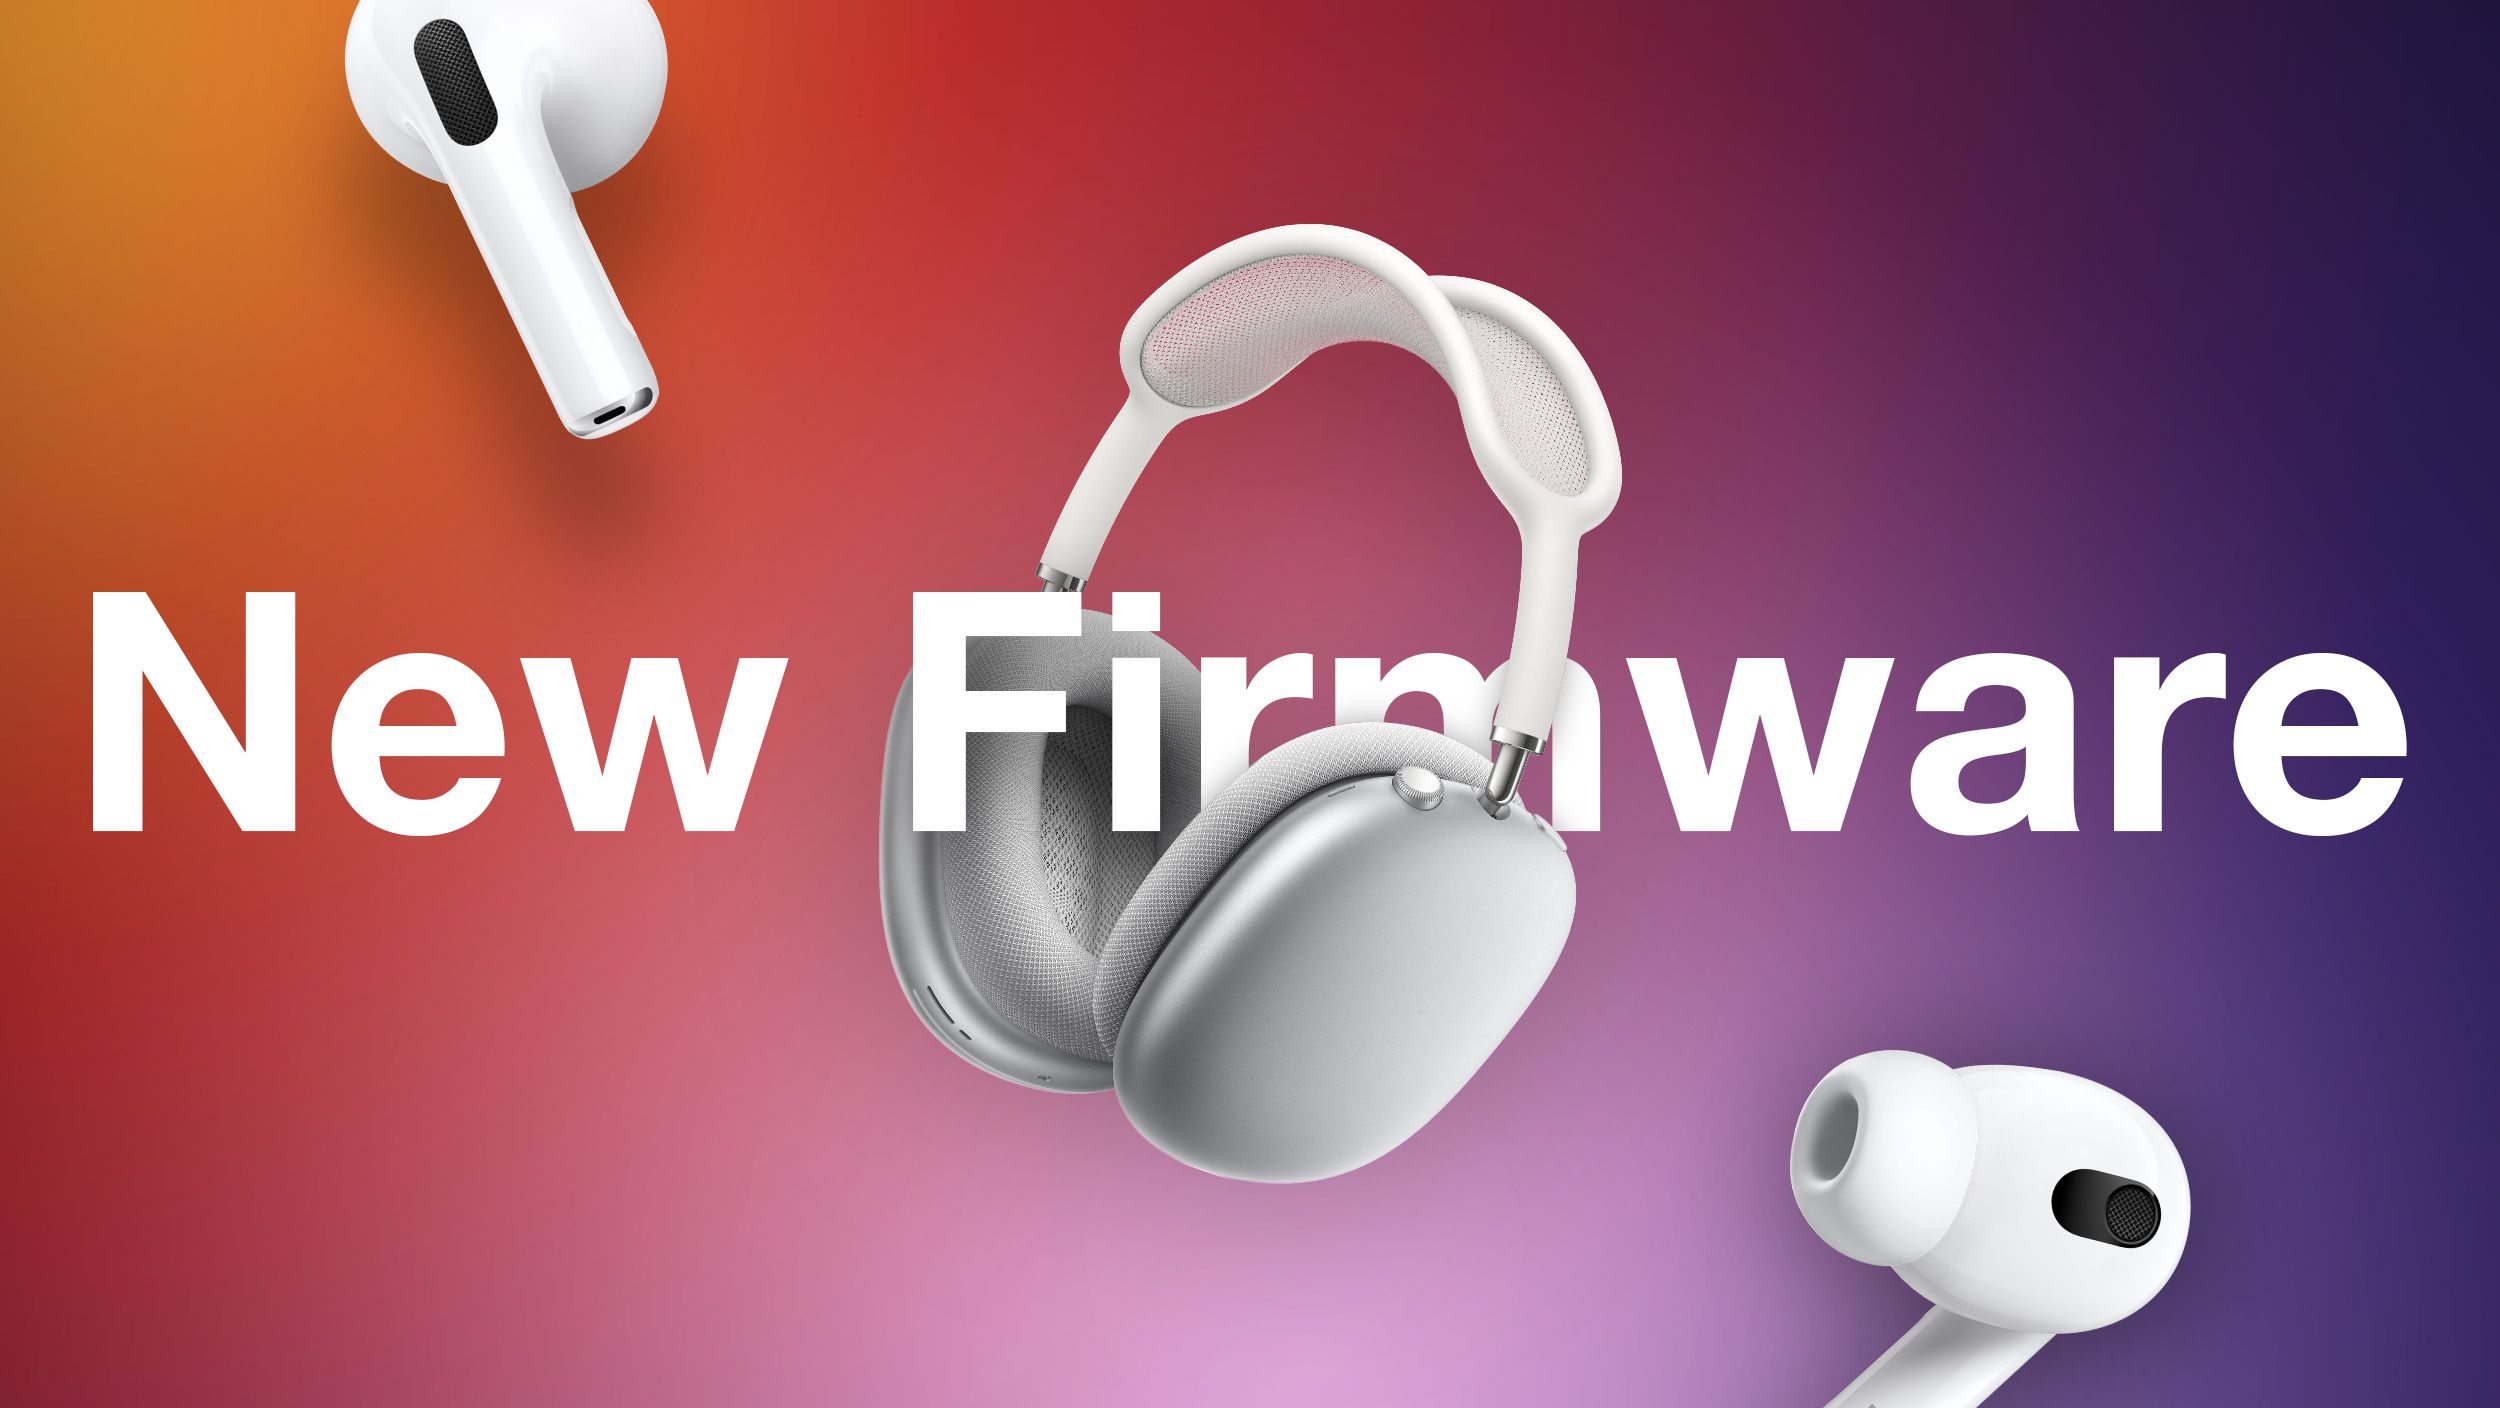 New Firmware Updates for AirPods and Beats: What You Need to Know